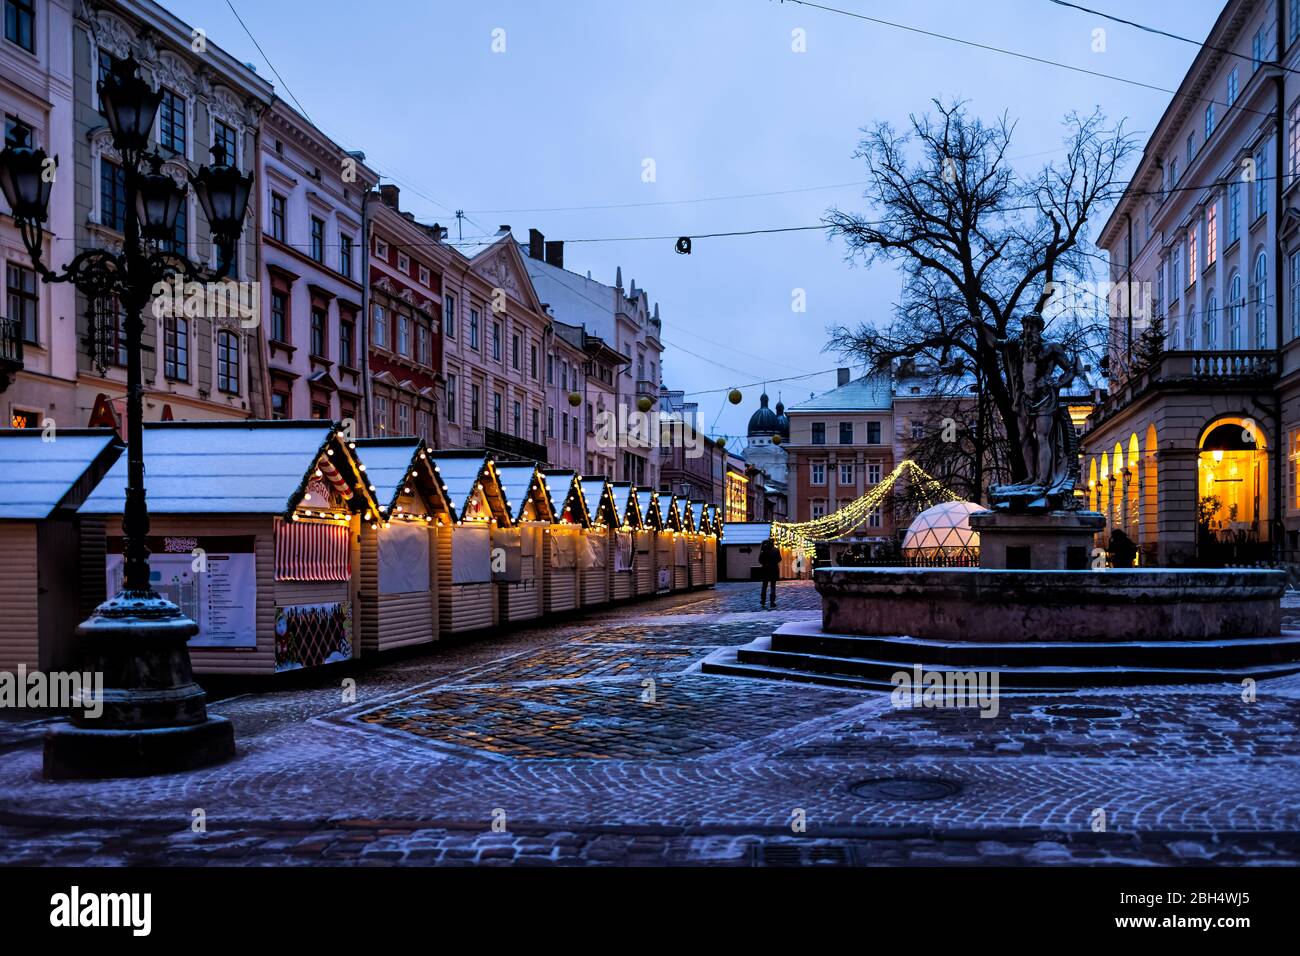 Lviv, Ukraine - December 28, 2019: Old town market square water fountain in Lvov with winter Christmas illumination and empty rynok at night with snow Stock Photo